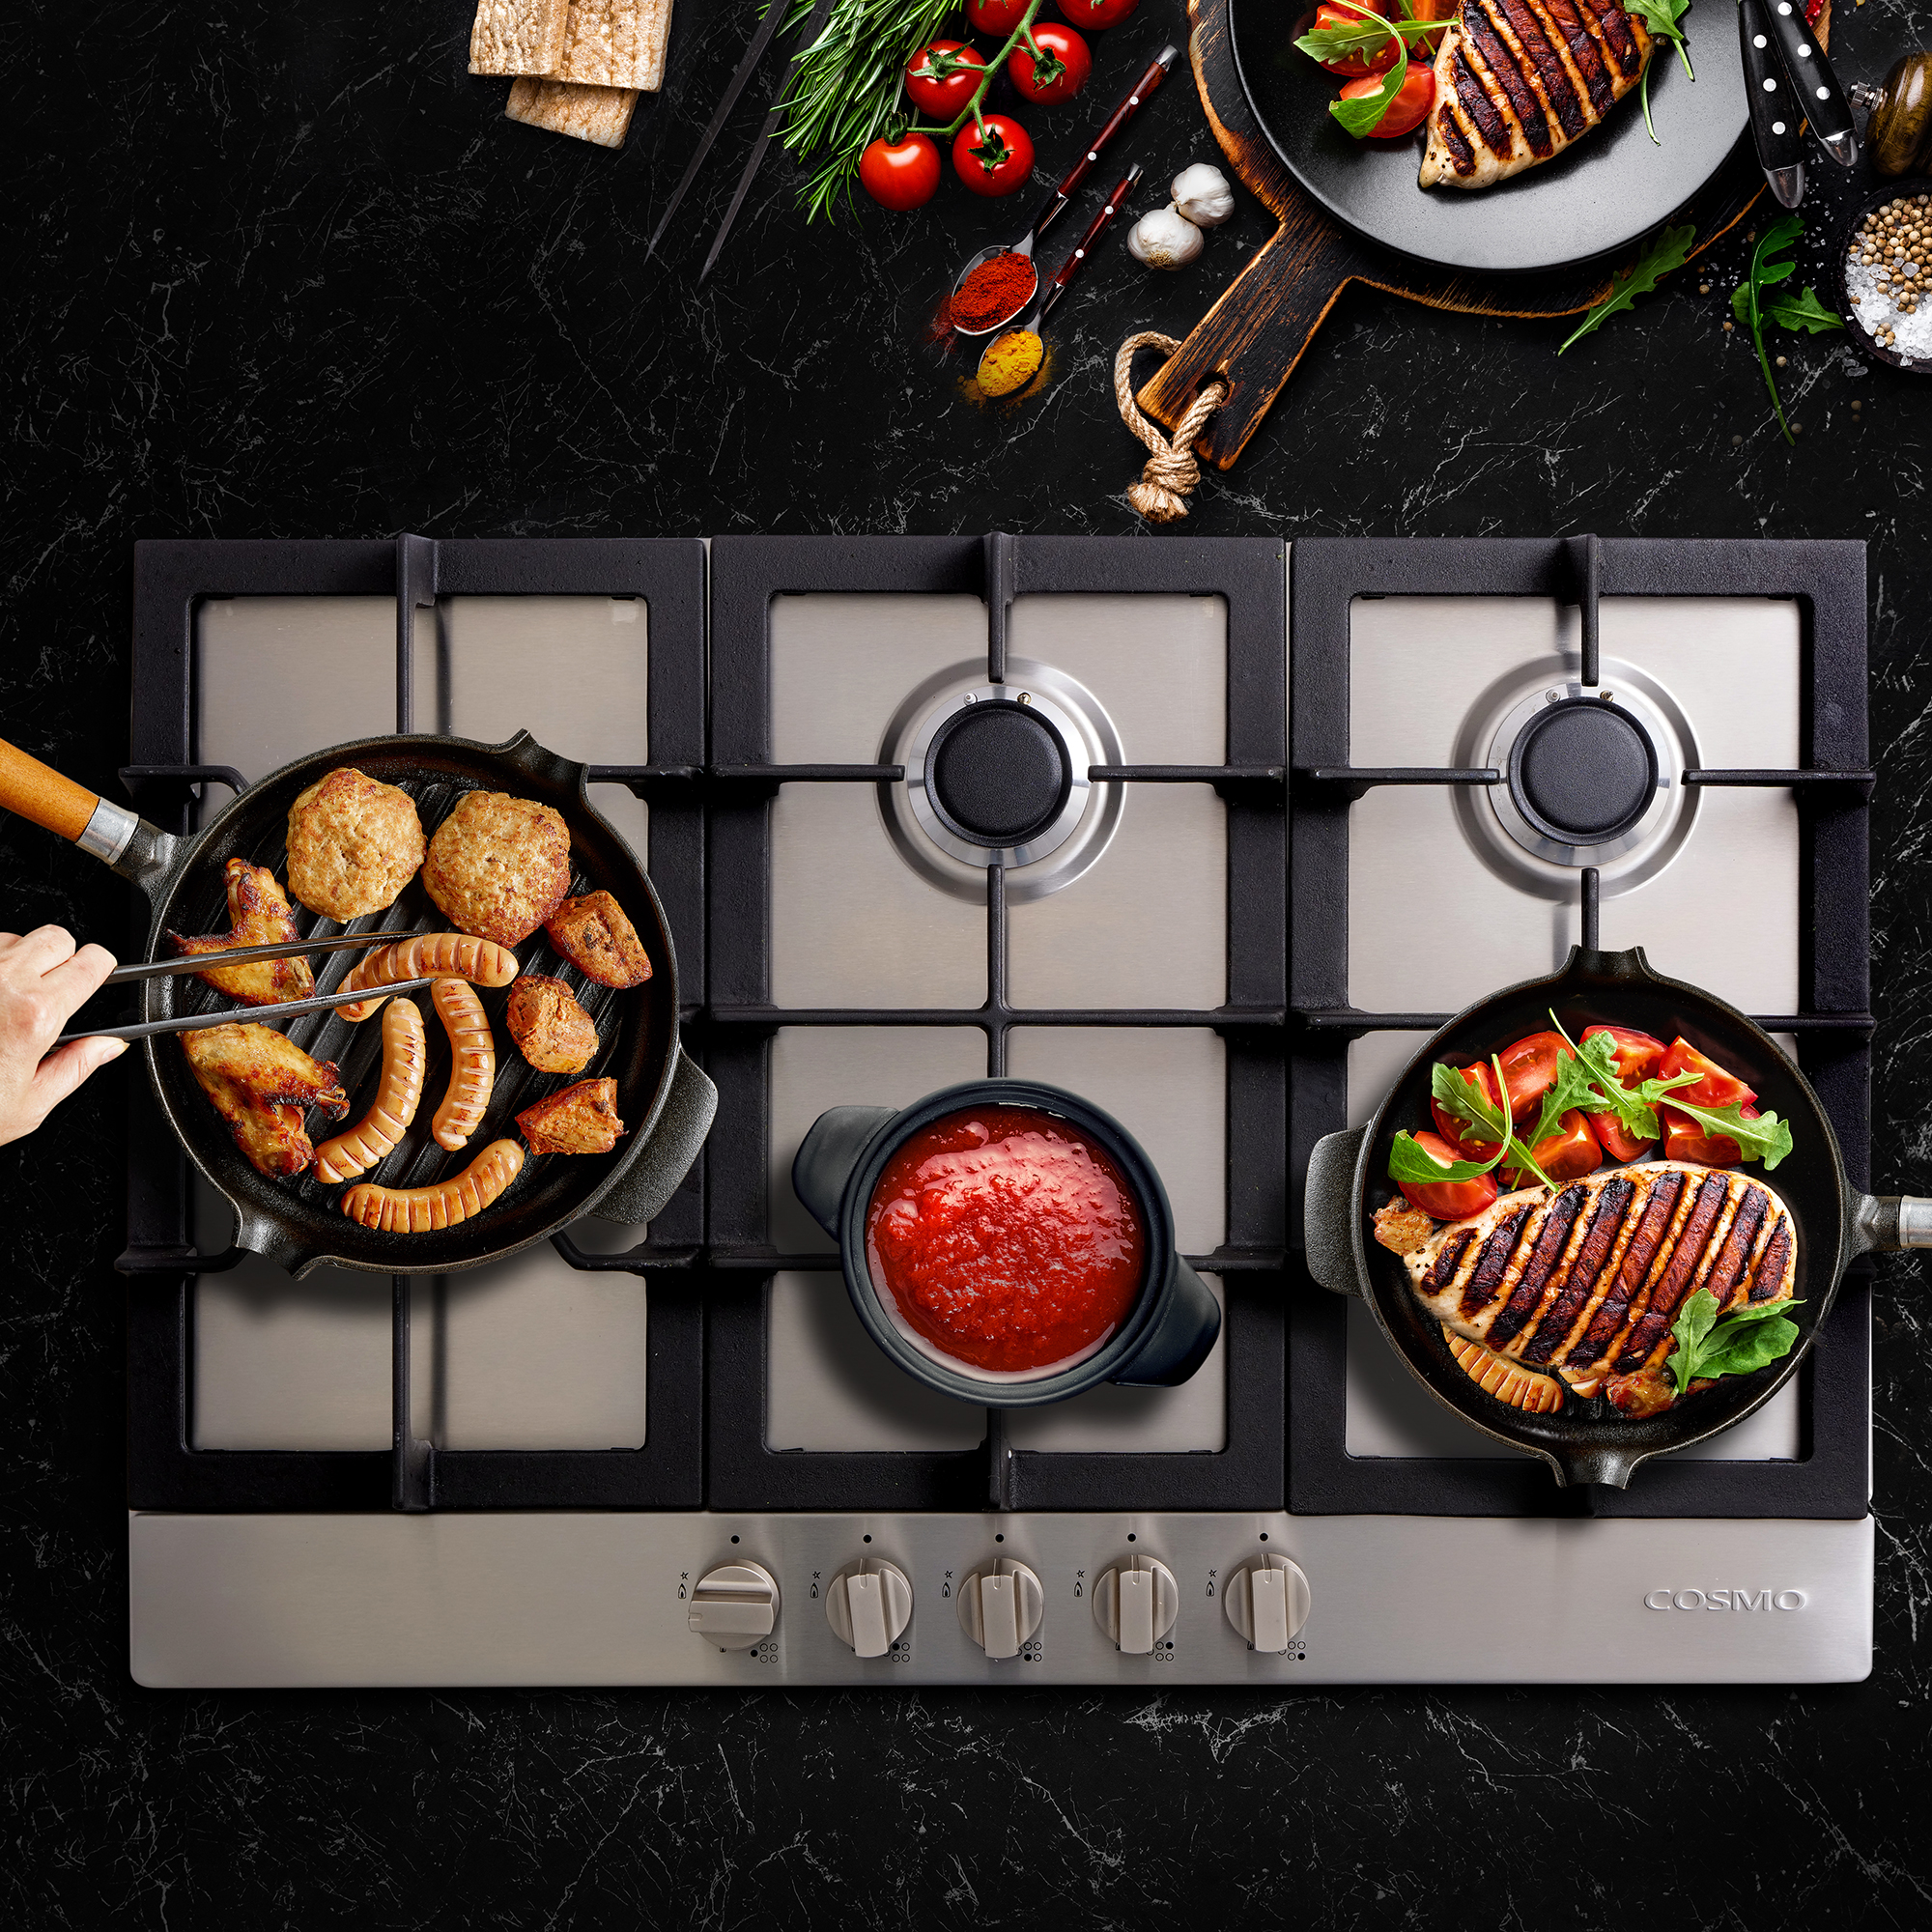 The Different Types of Cooktops